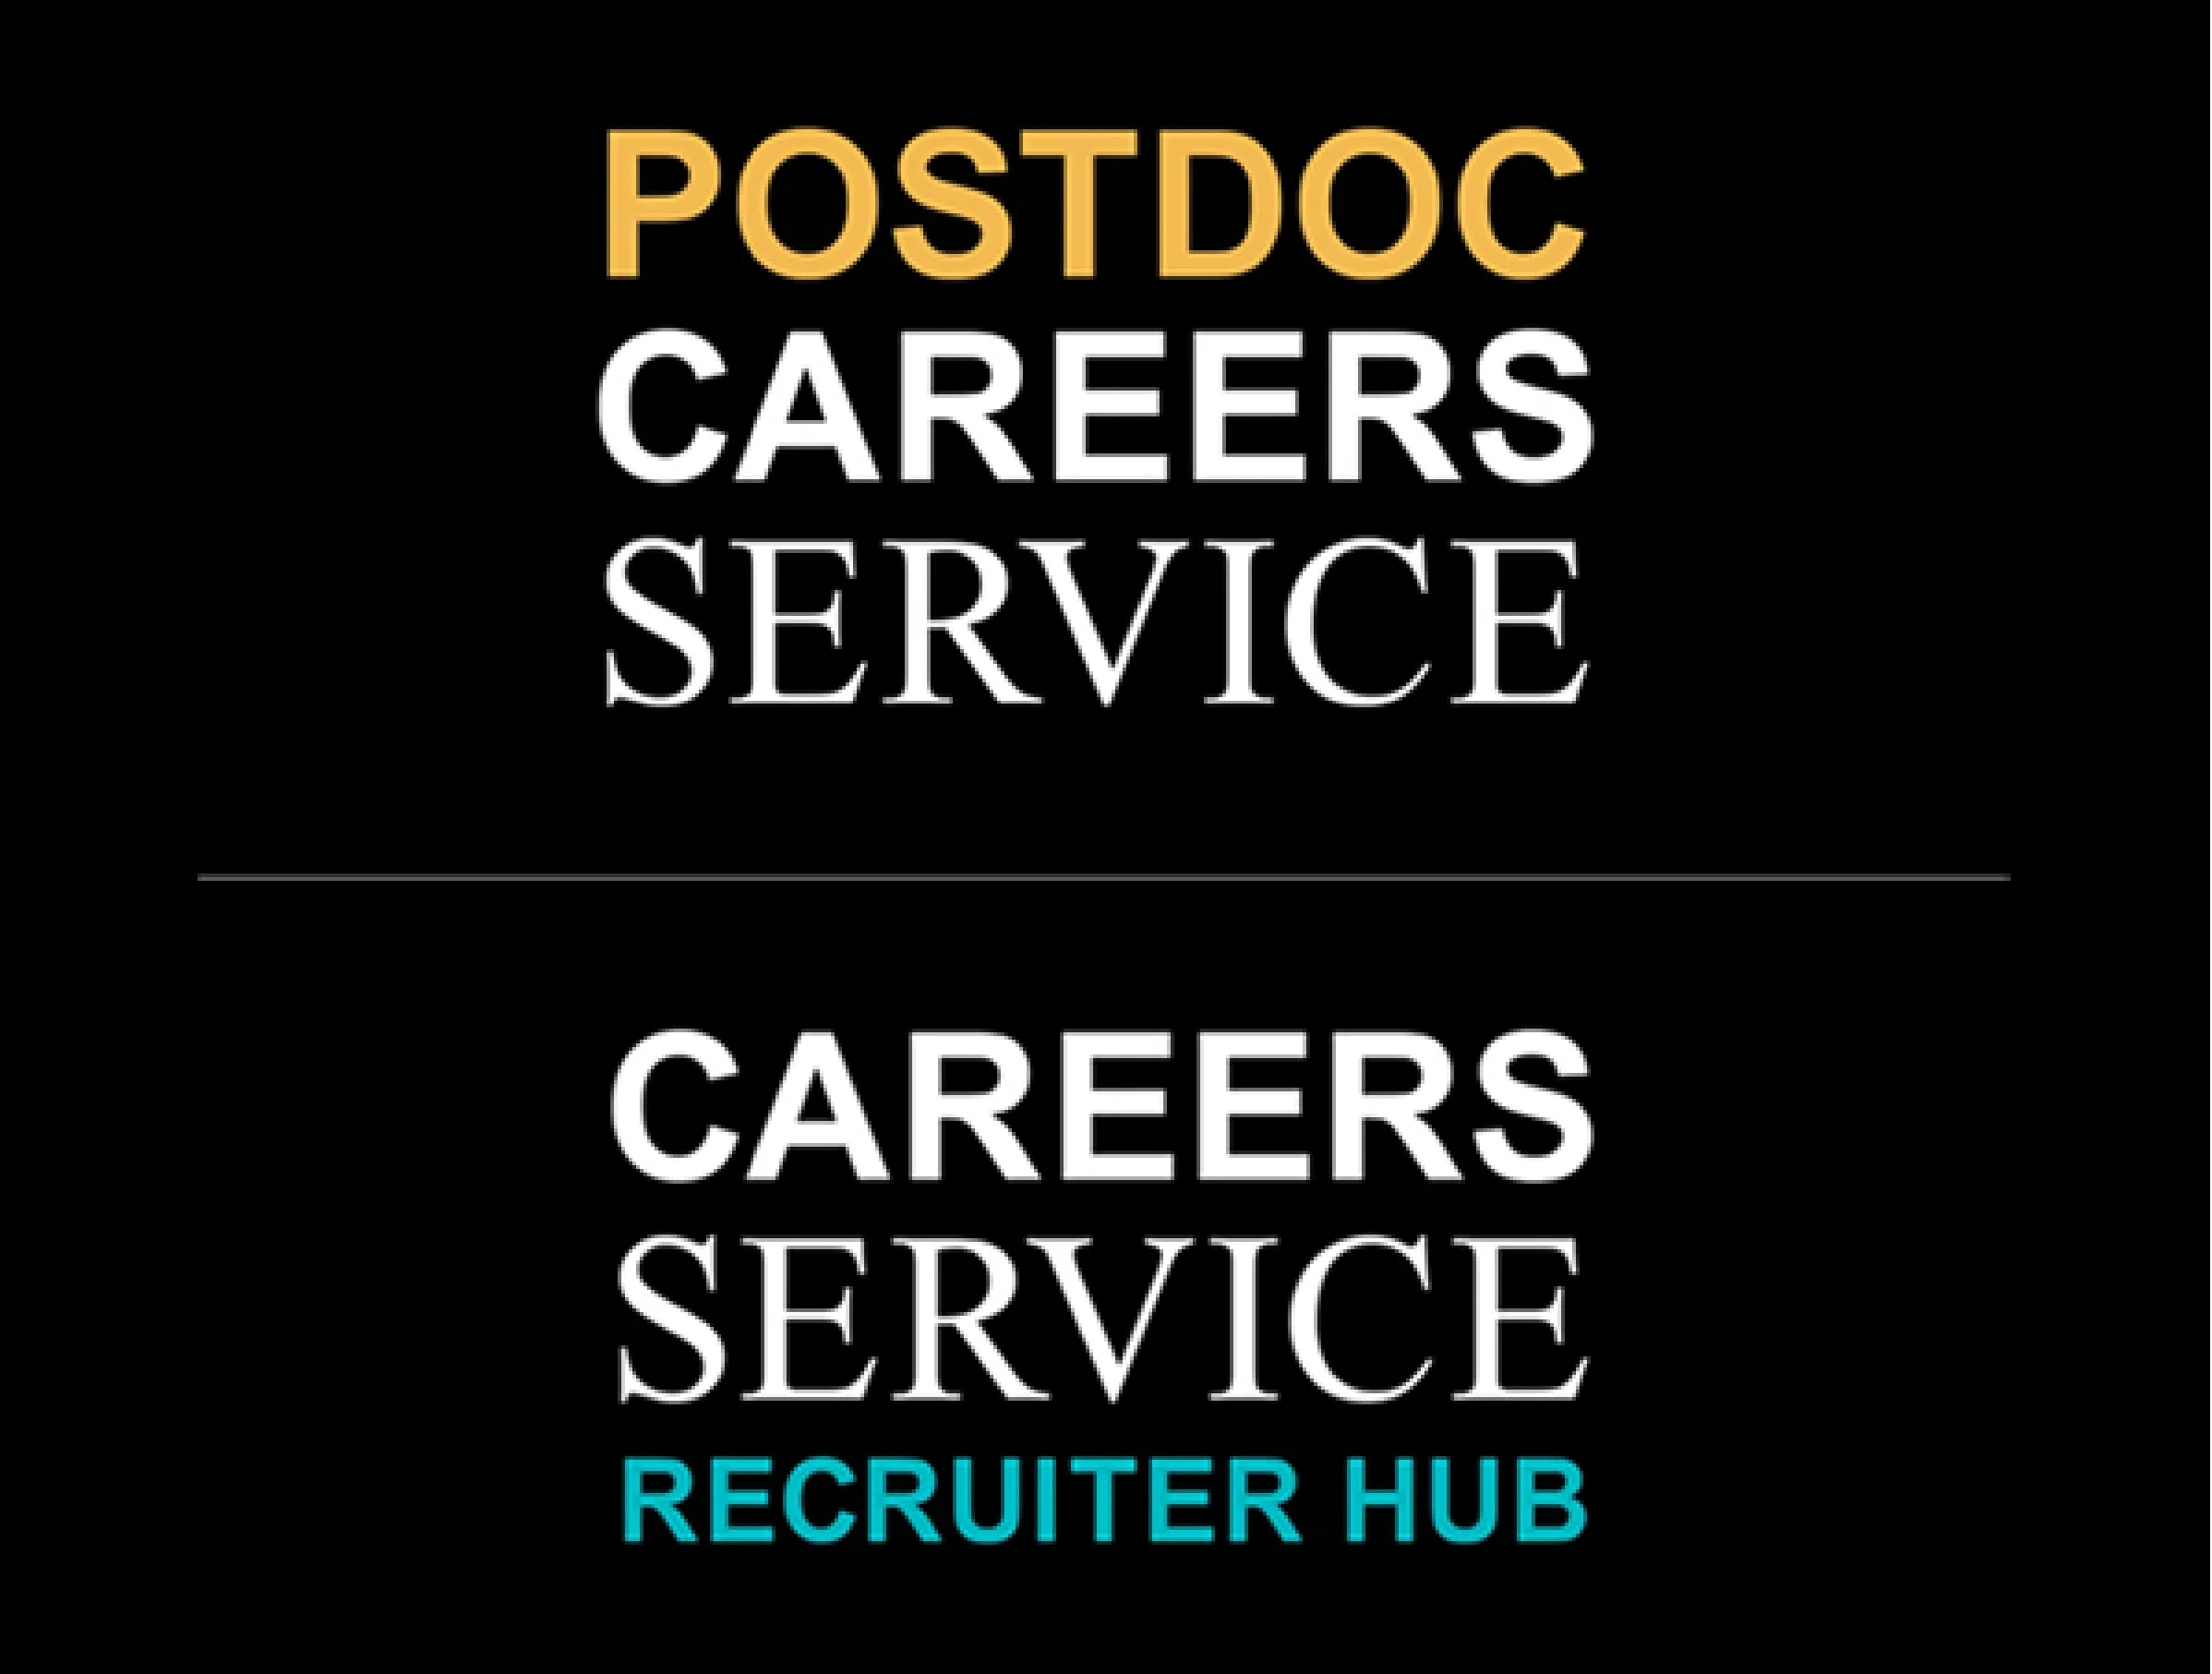 Alternative Careers Service namestyles for Postdocs and Recruiter Hub